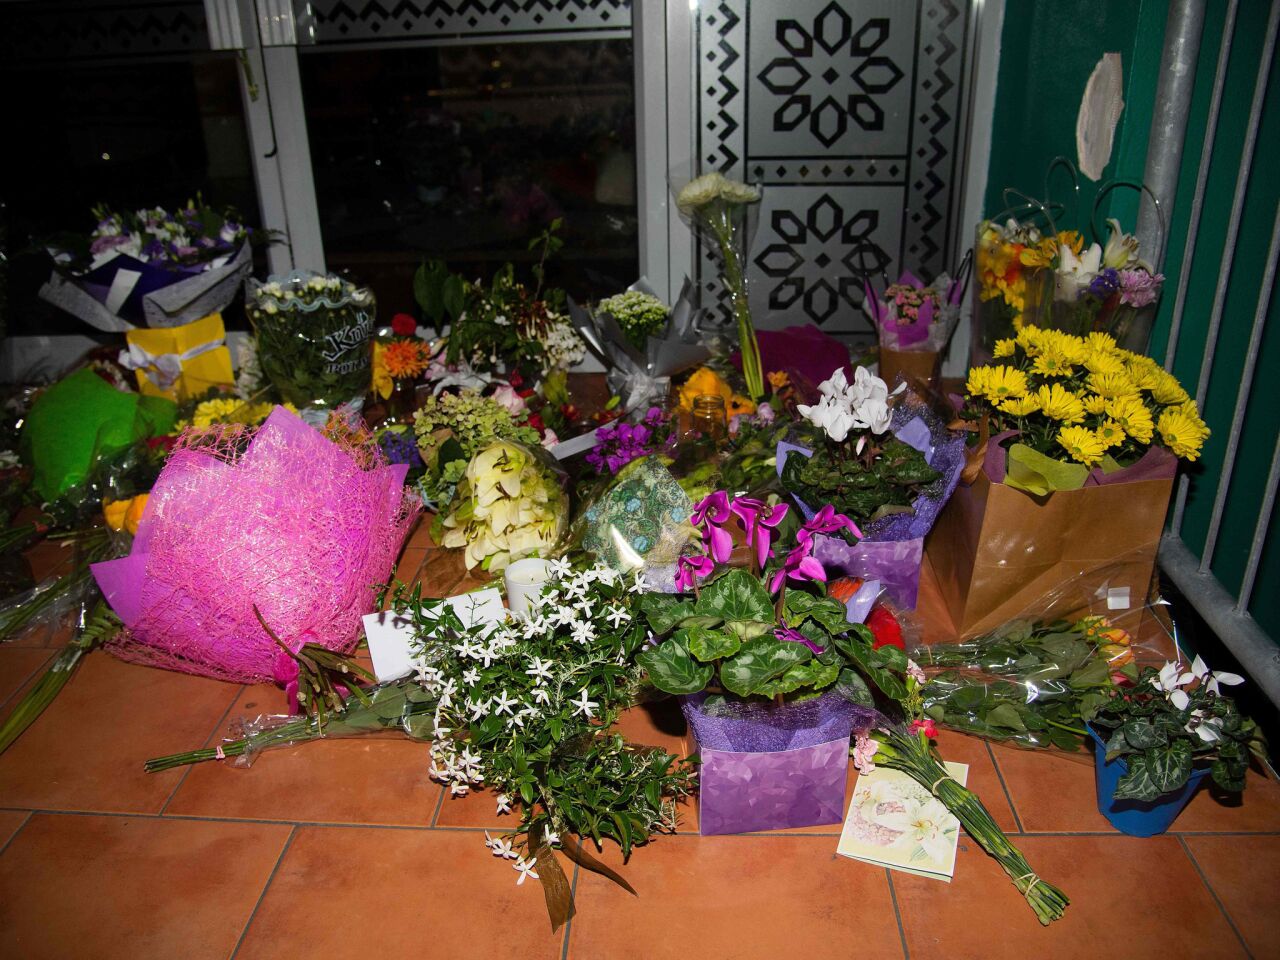 Flowers are placed on the front steps of the Wellington Masjid mosque in Kilbirnie in Wellington after a shooting incident at two mosques in Christchurch.